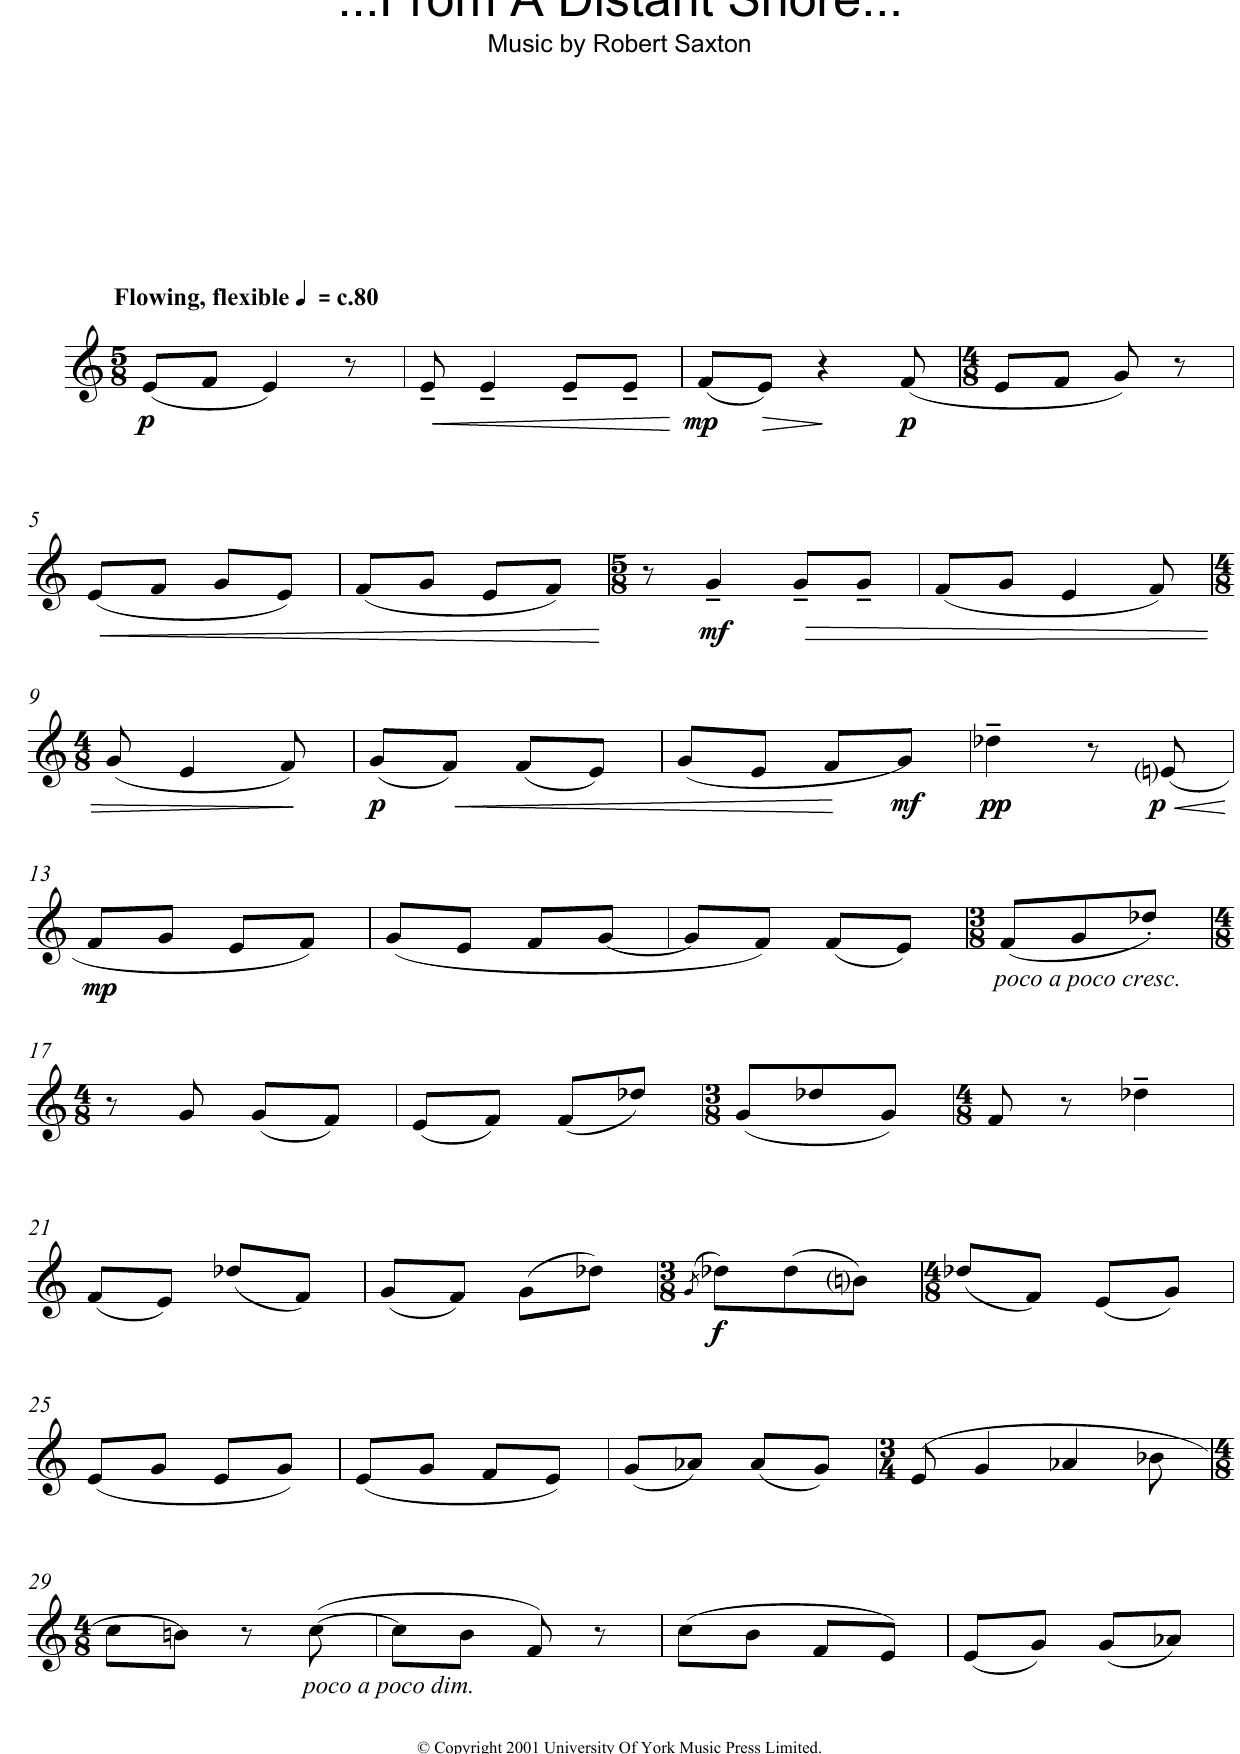 Robert Saxton ...From A Distant Shore... sheet music notes and chords - Download Printable PDF and start playing in minutes.